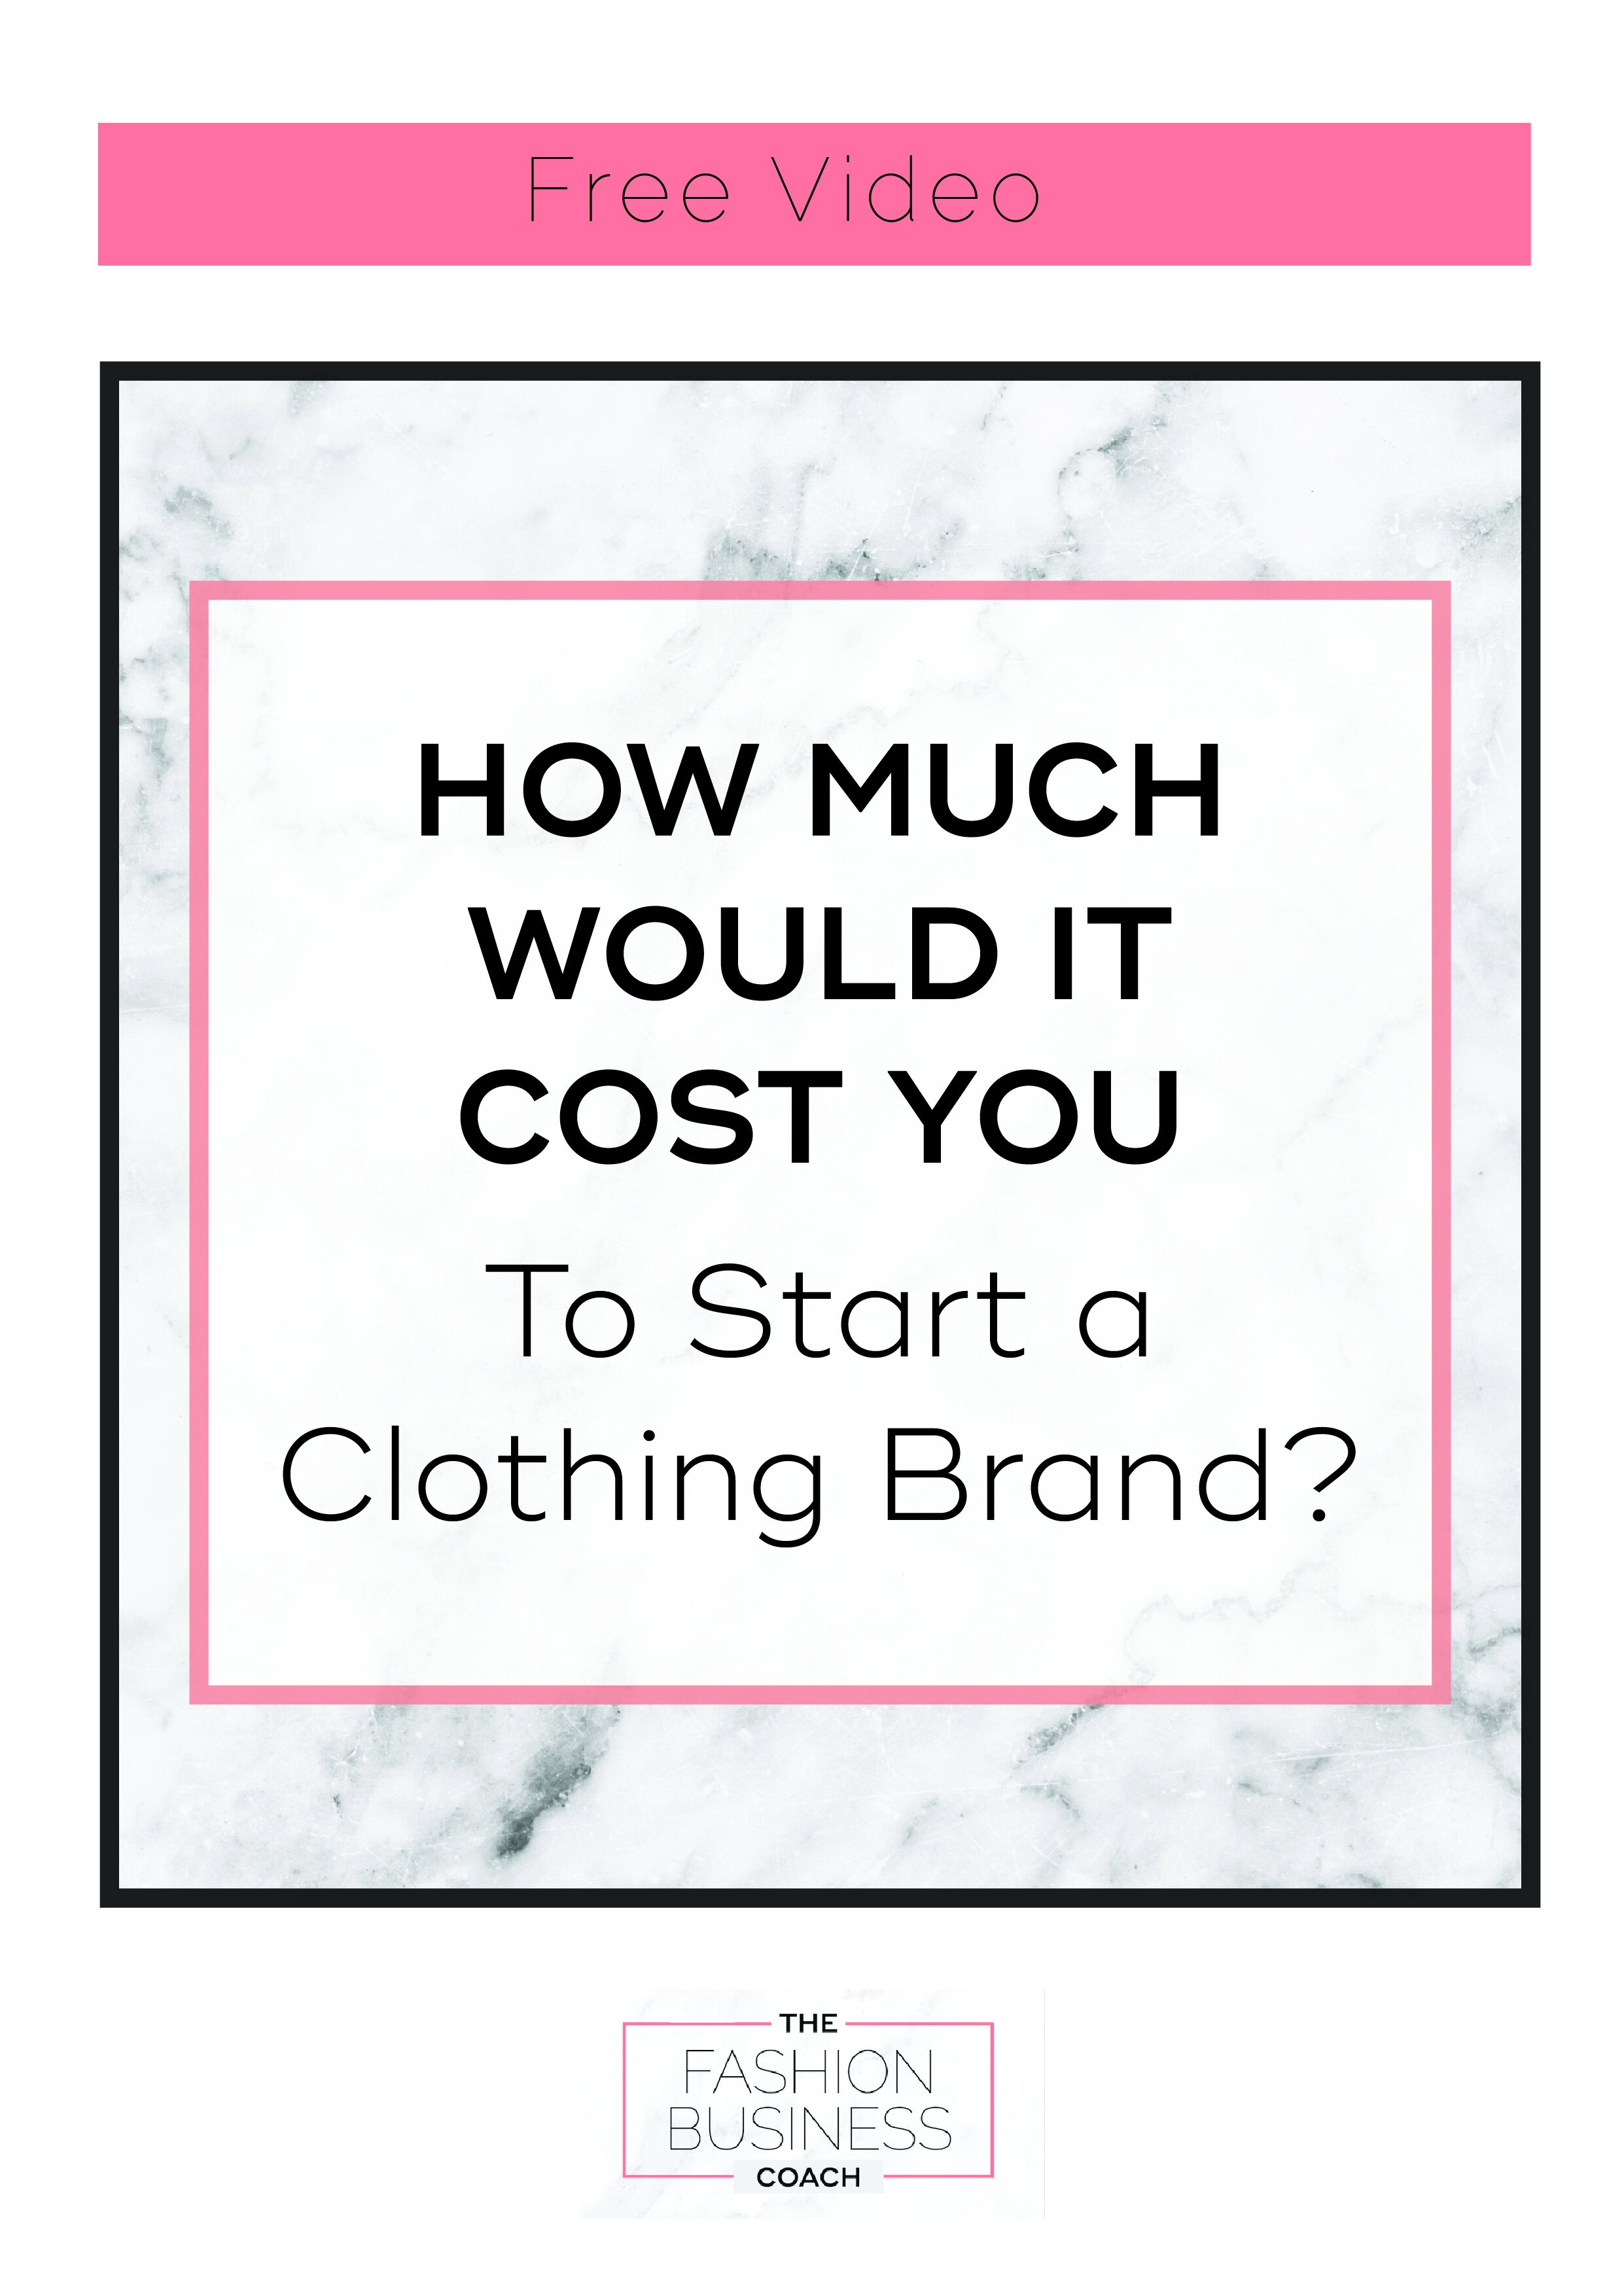 How Much Would it Cost You to Start a Clothing Brand 1.jpg